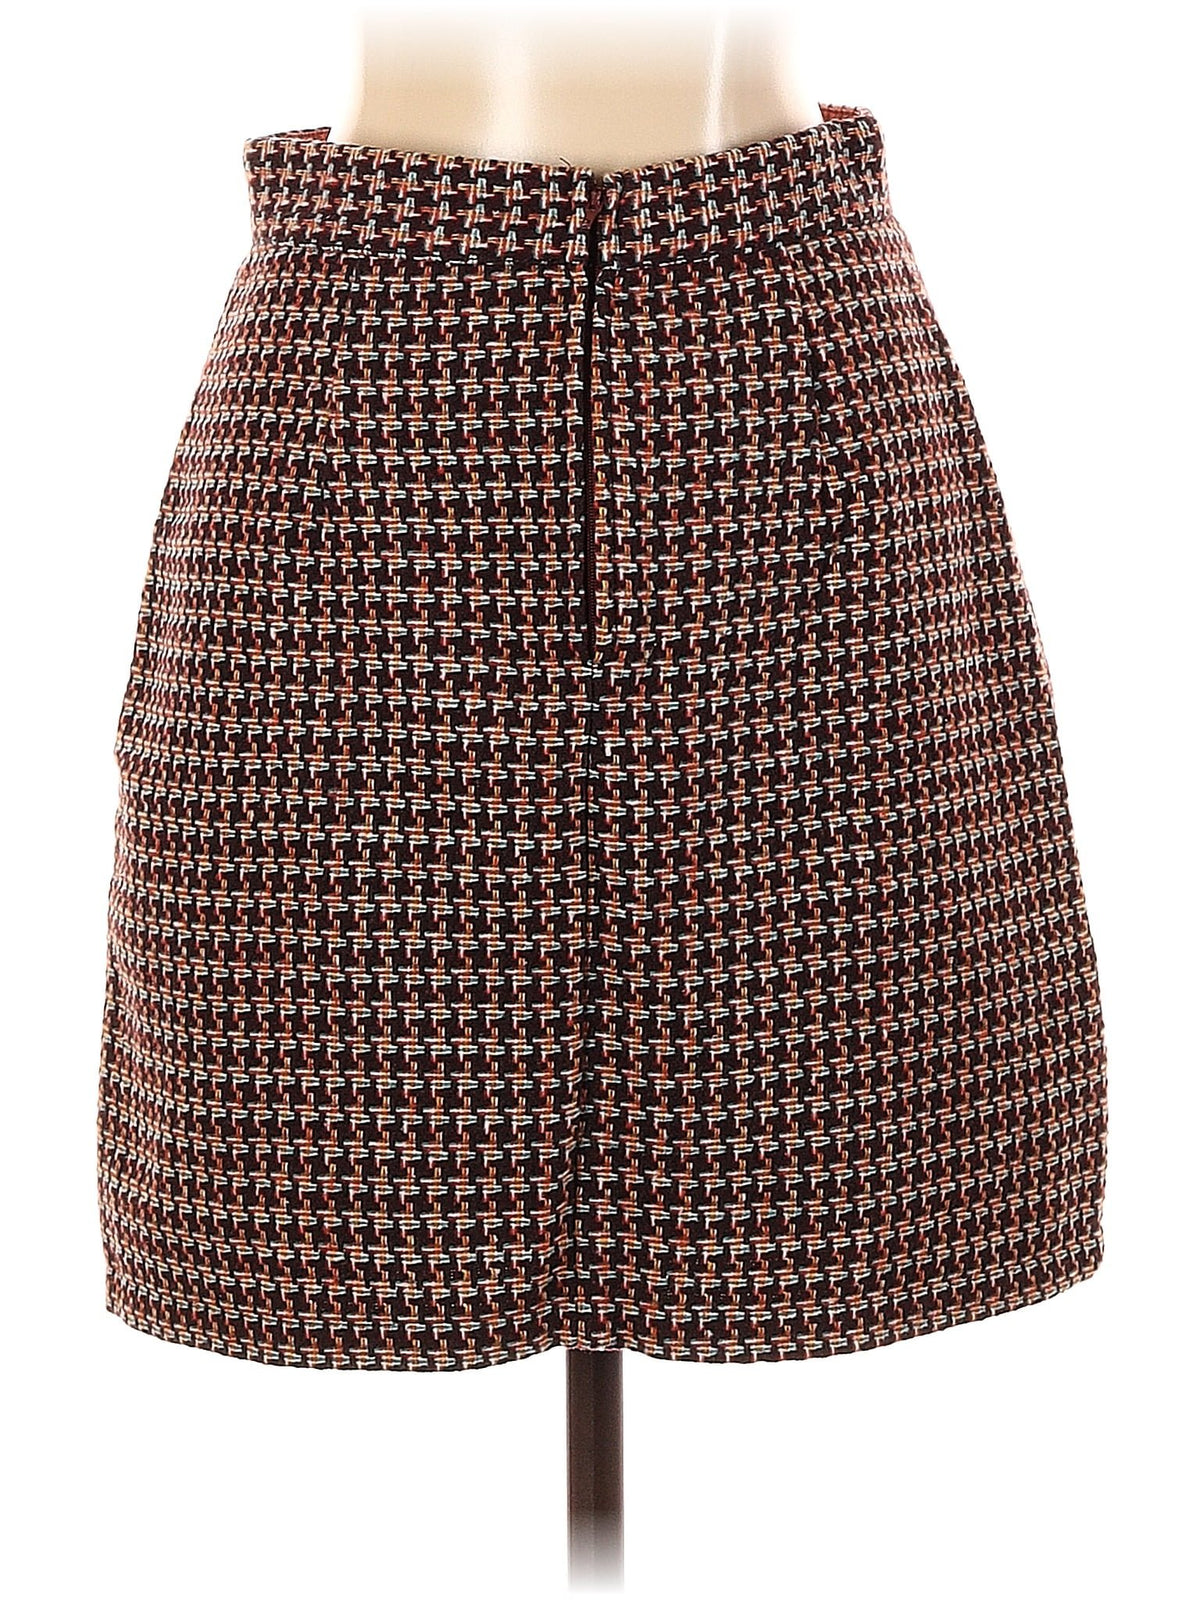 Casual Skirt size - 4